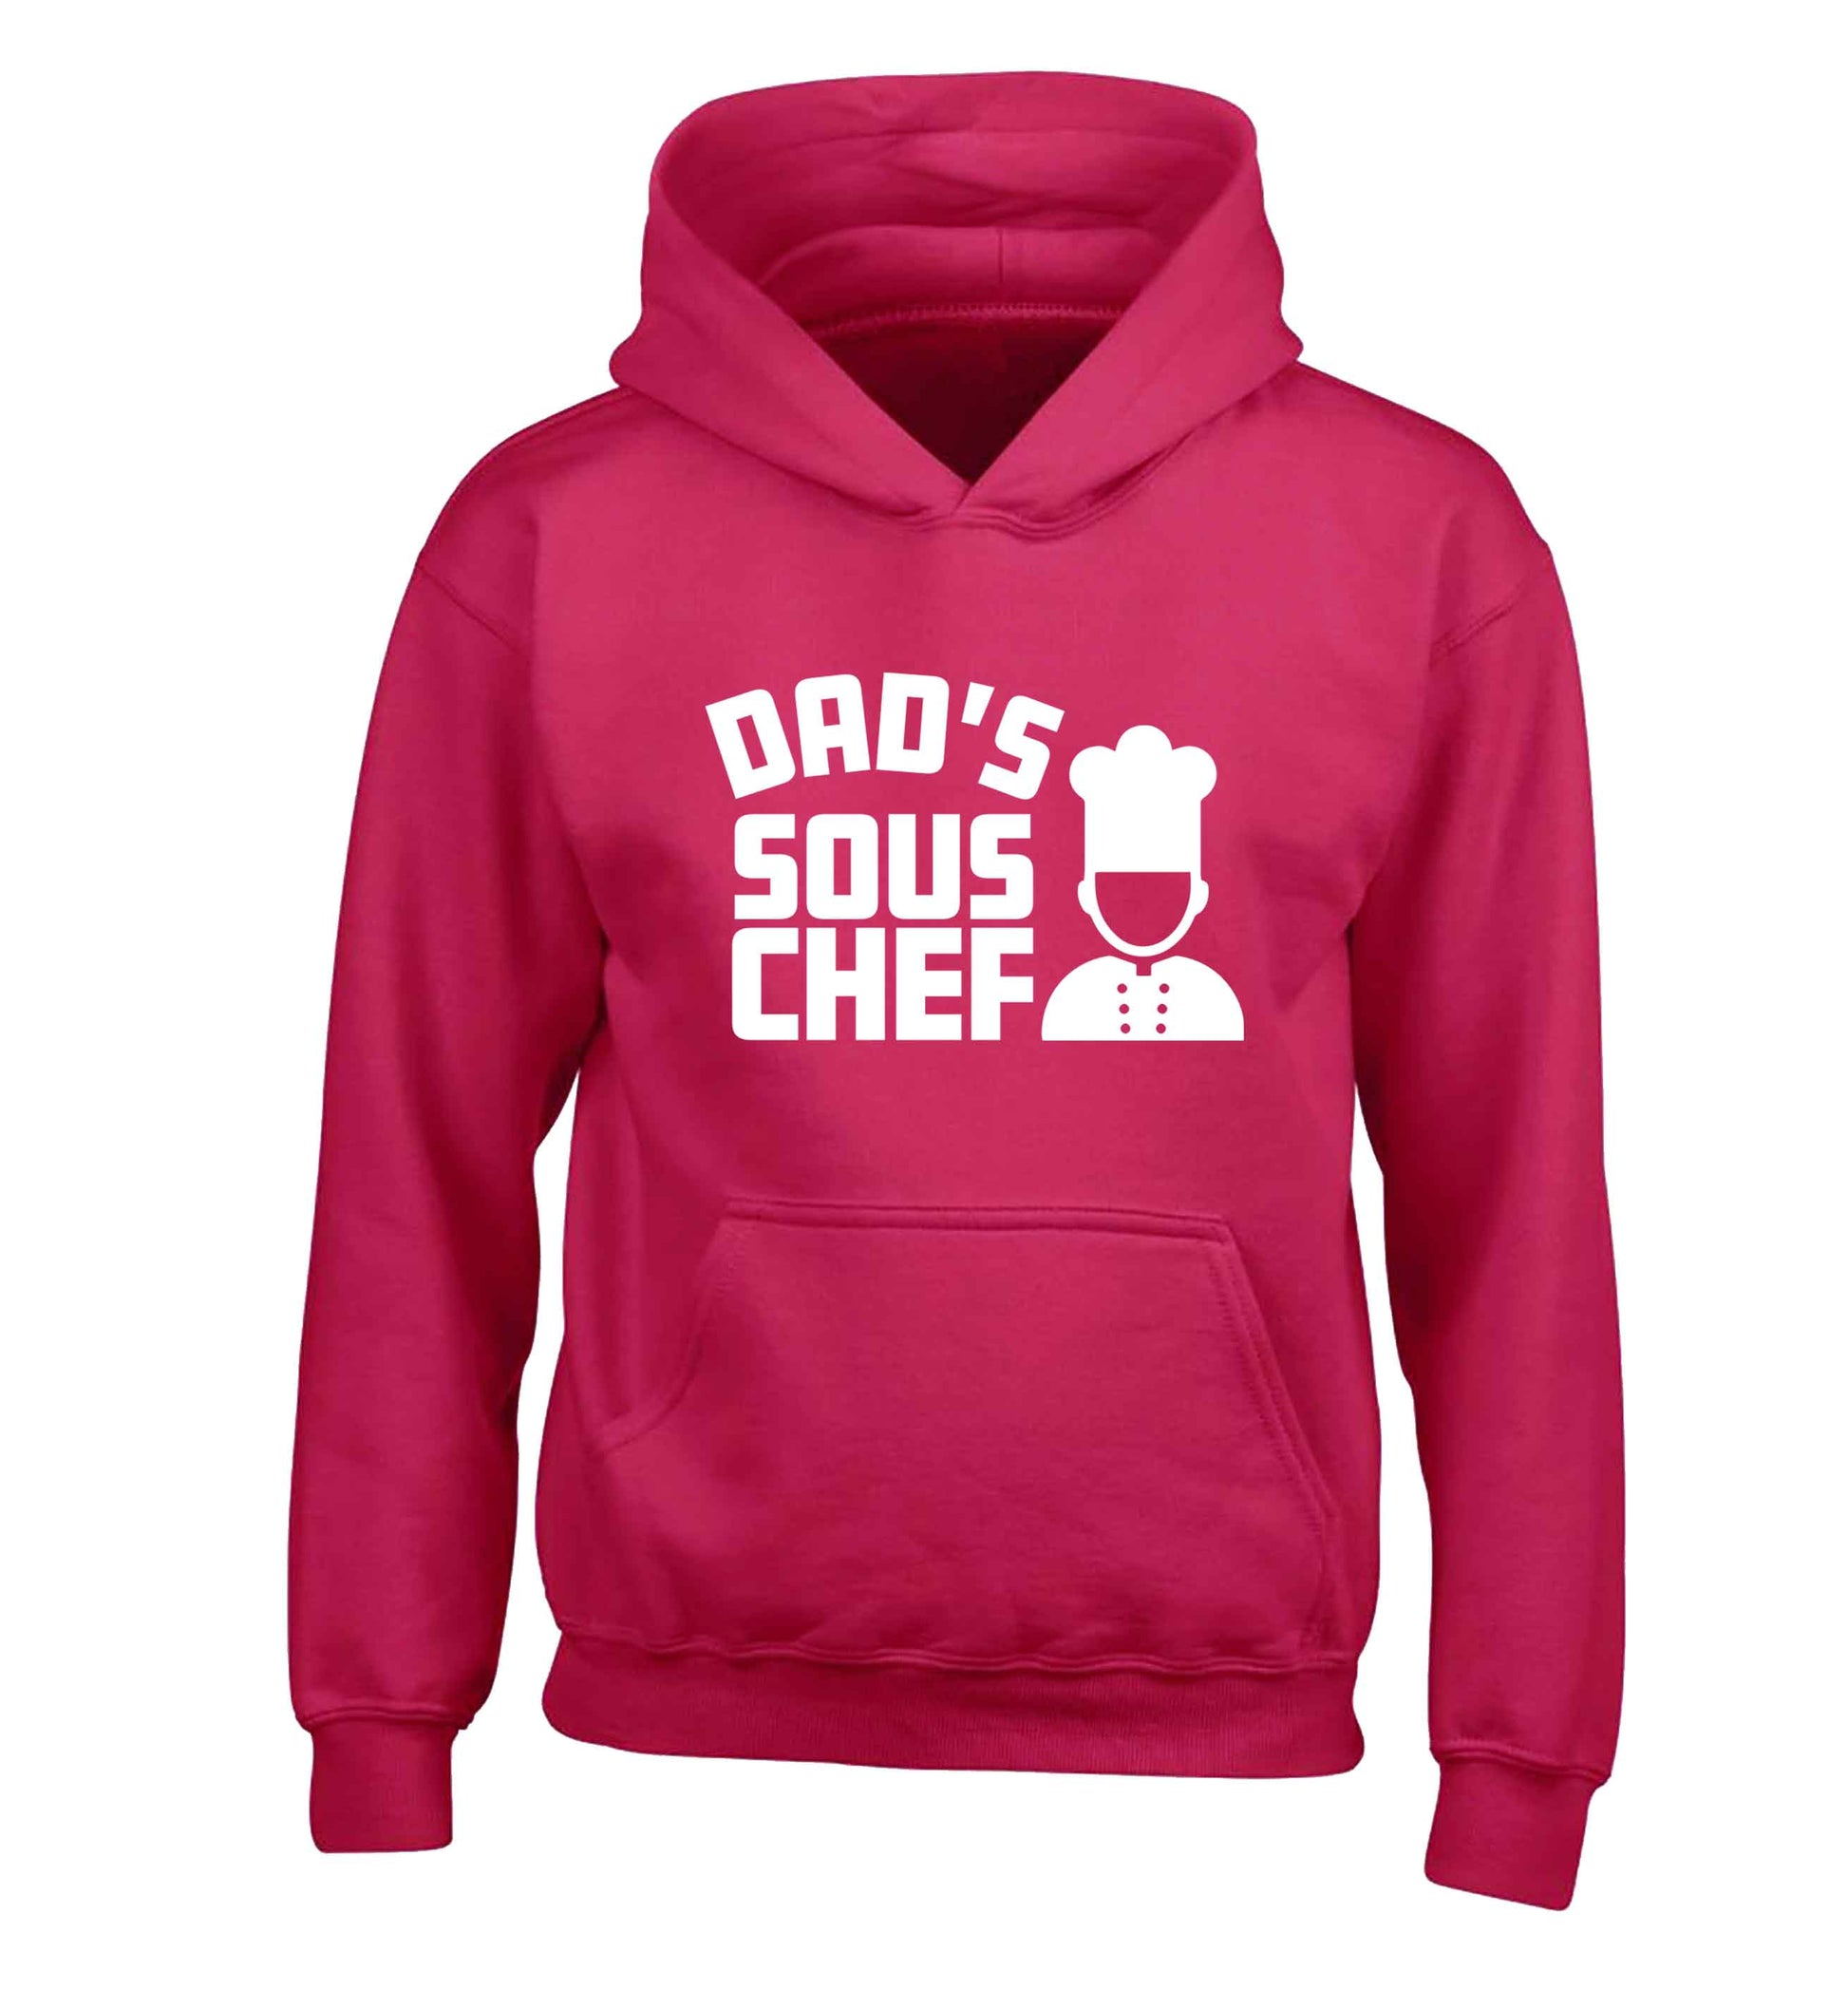 Dad's sous chef children's pink hoodie 12-13 Years